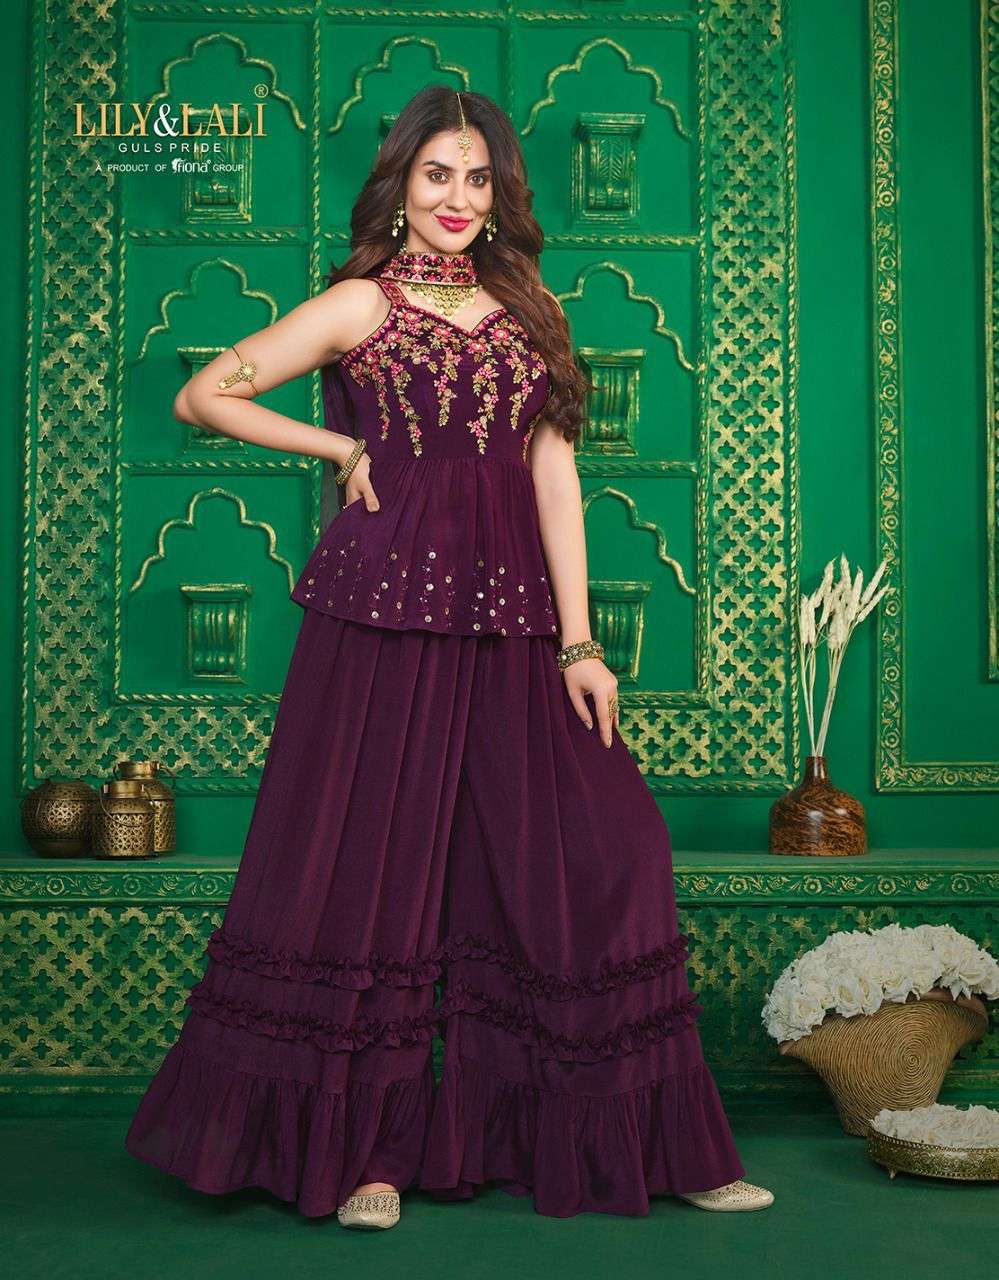 lily and lali spaghetti 9001-9006 series party wear sharara salwar kameez wholesale price